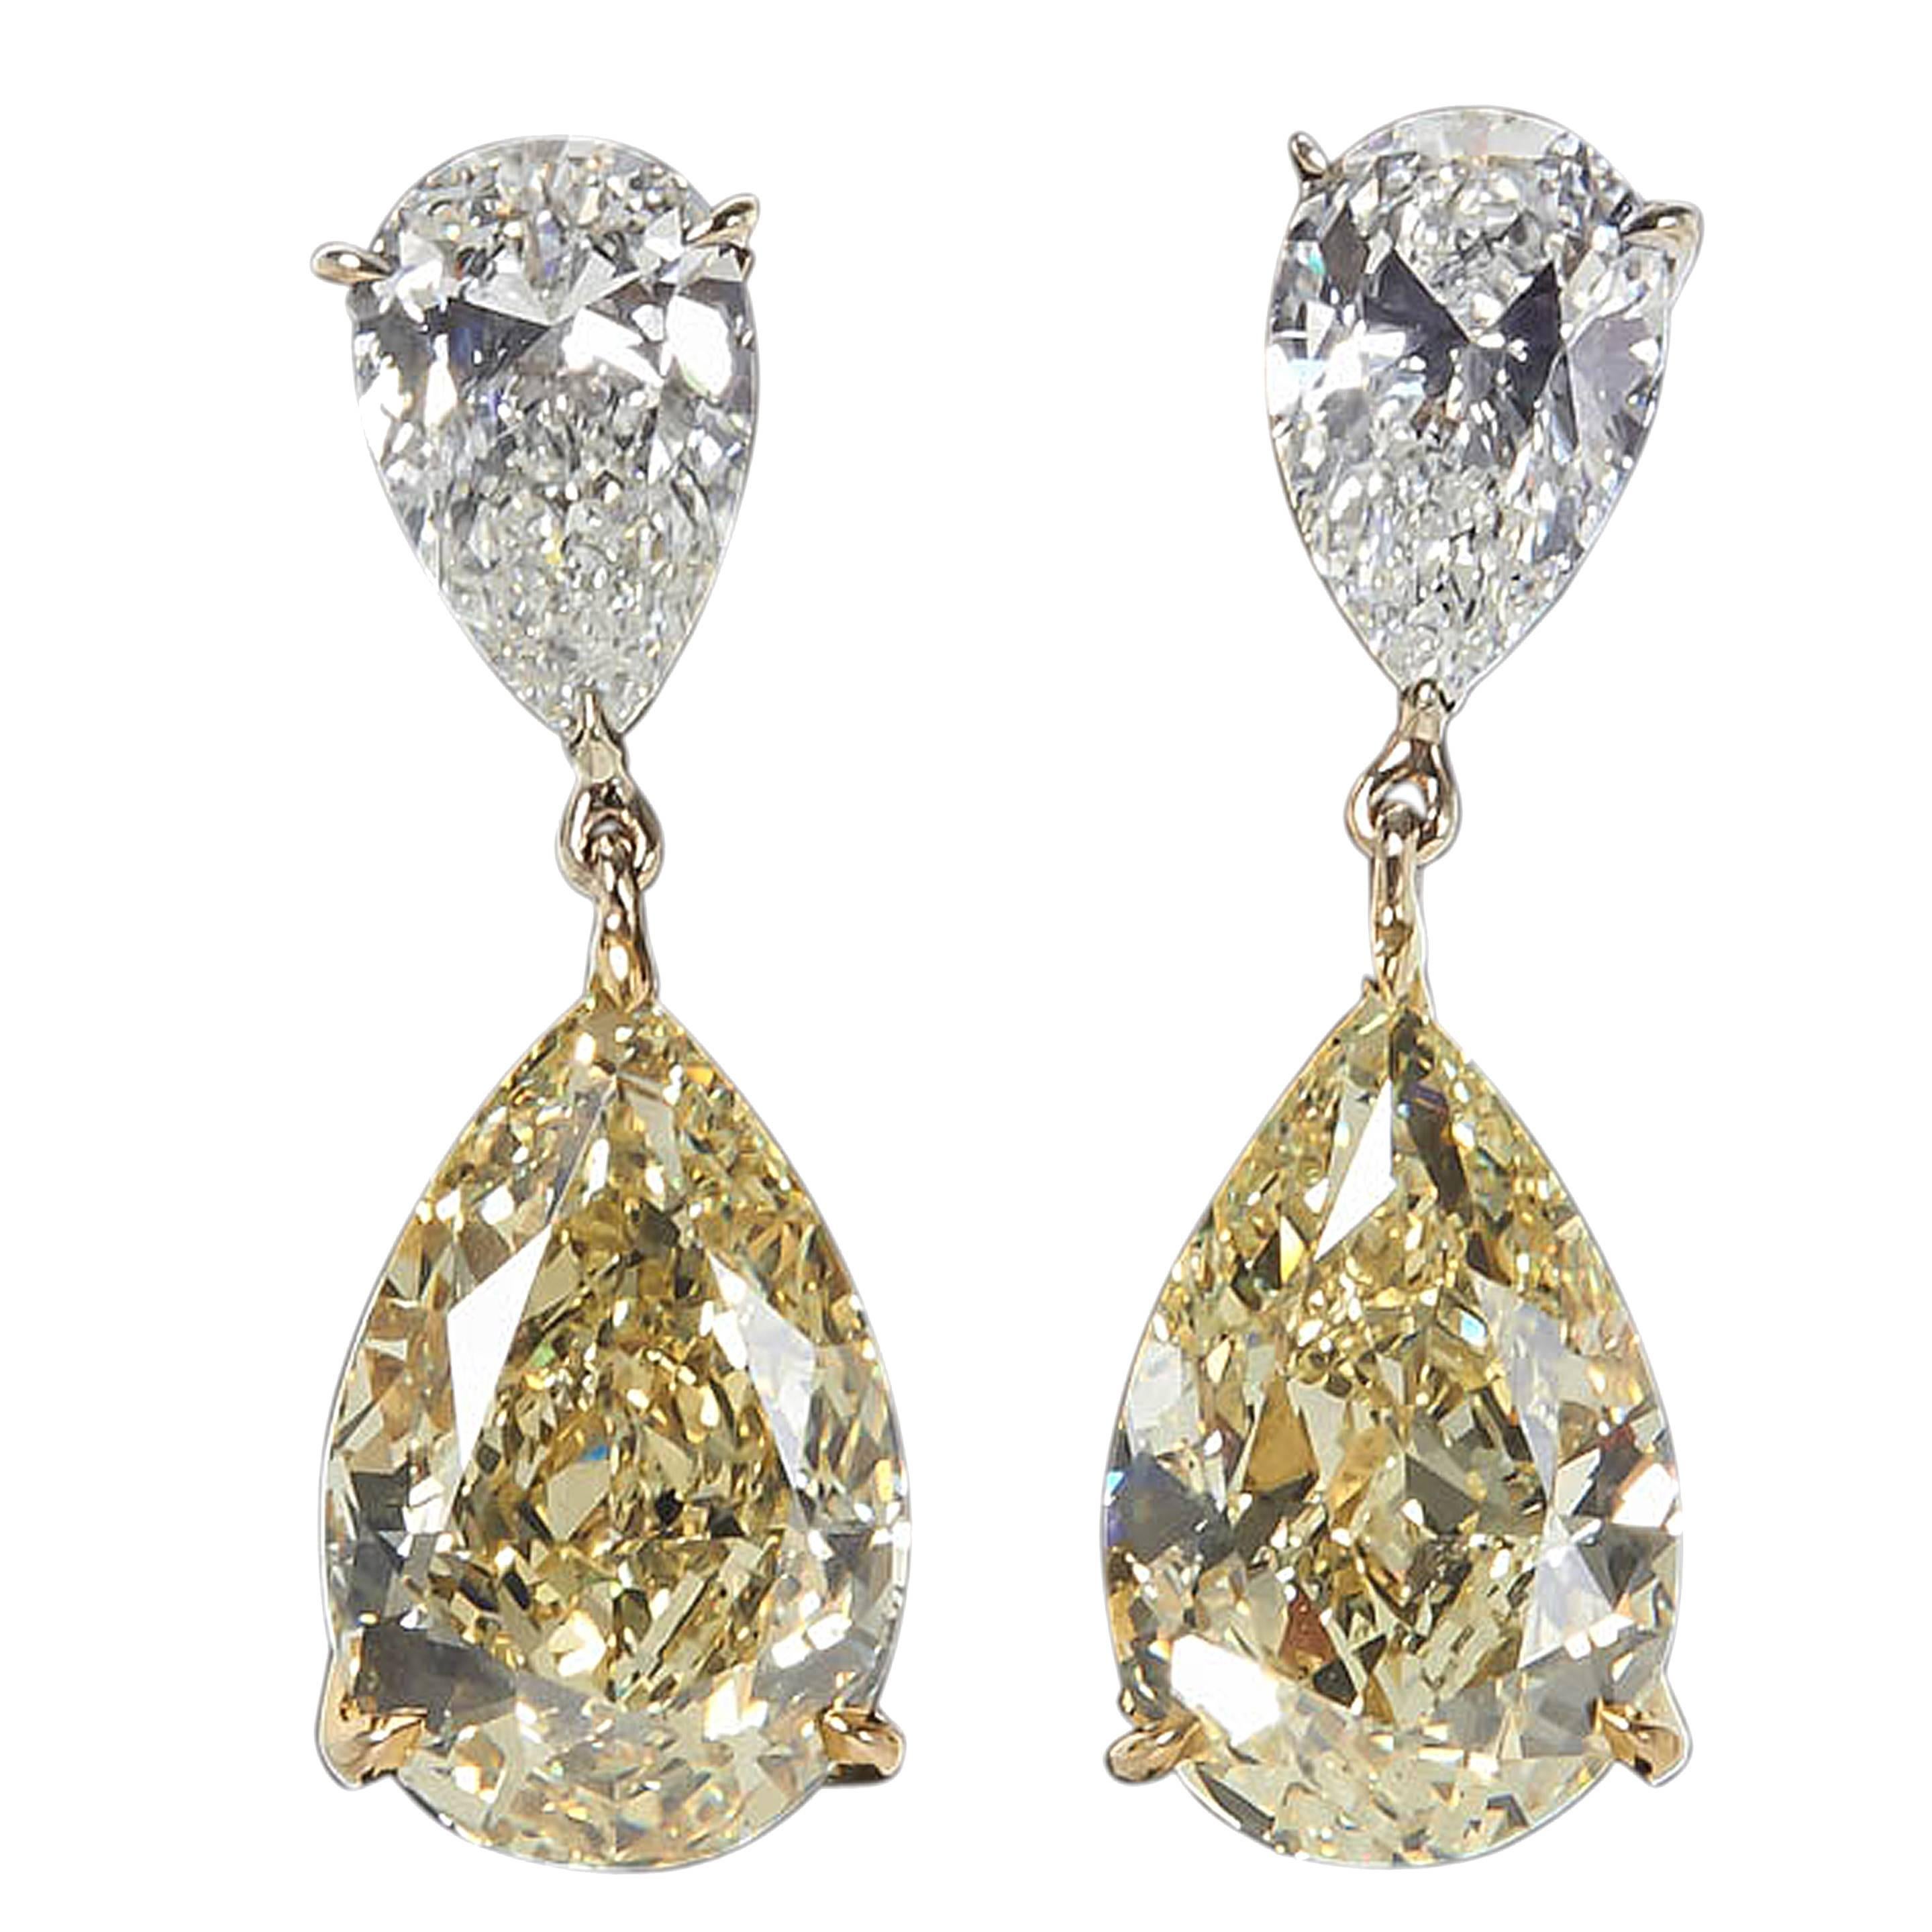 Important 14 carats GIA Cert White and Fancy Yellow Diamonds Earrings